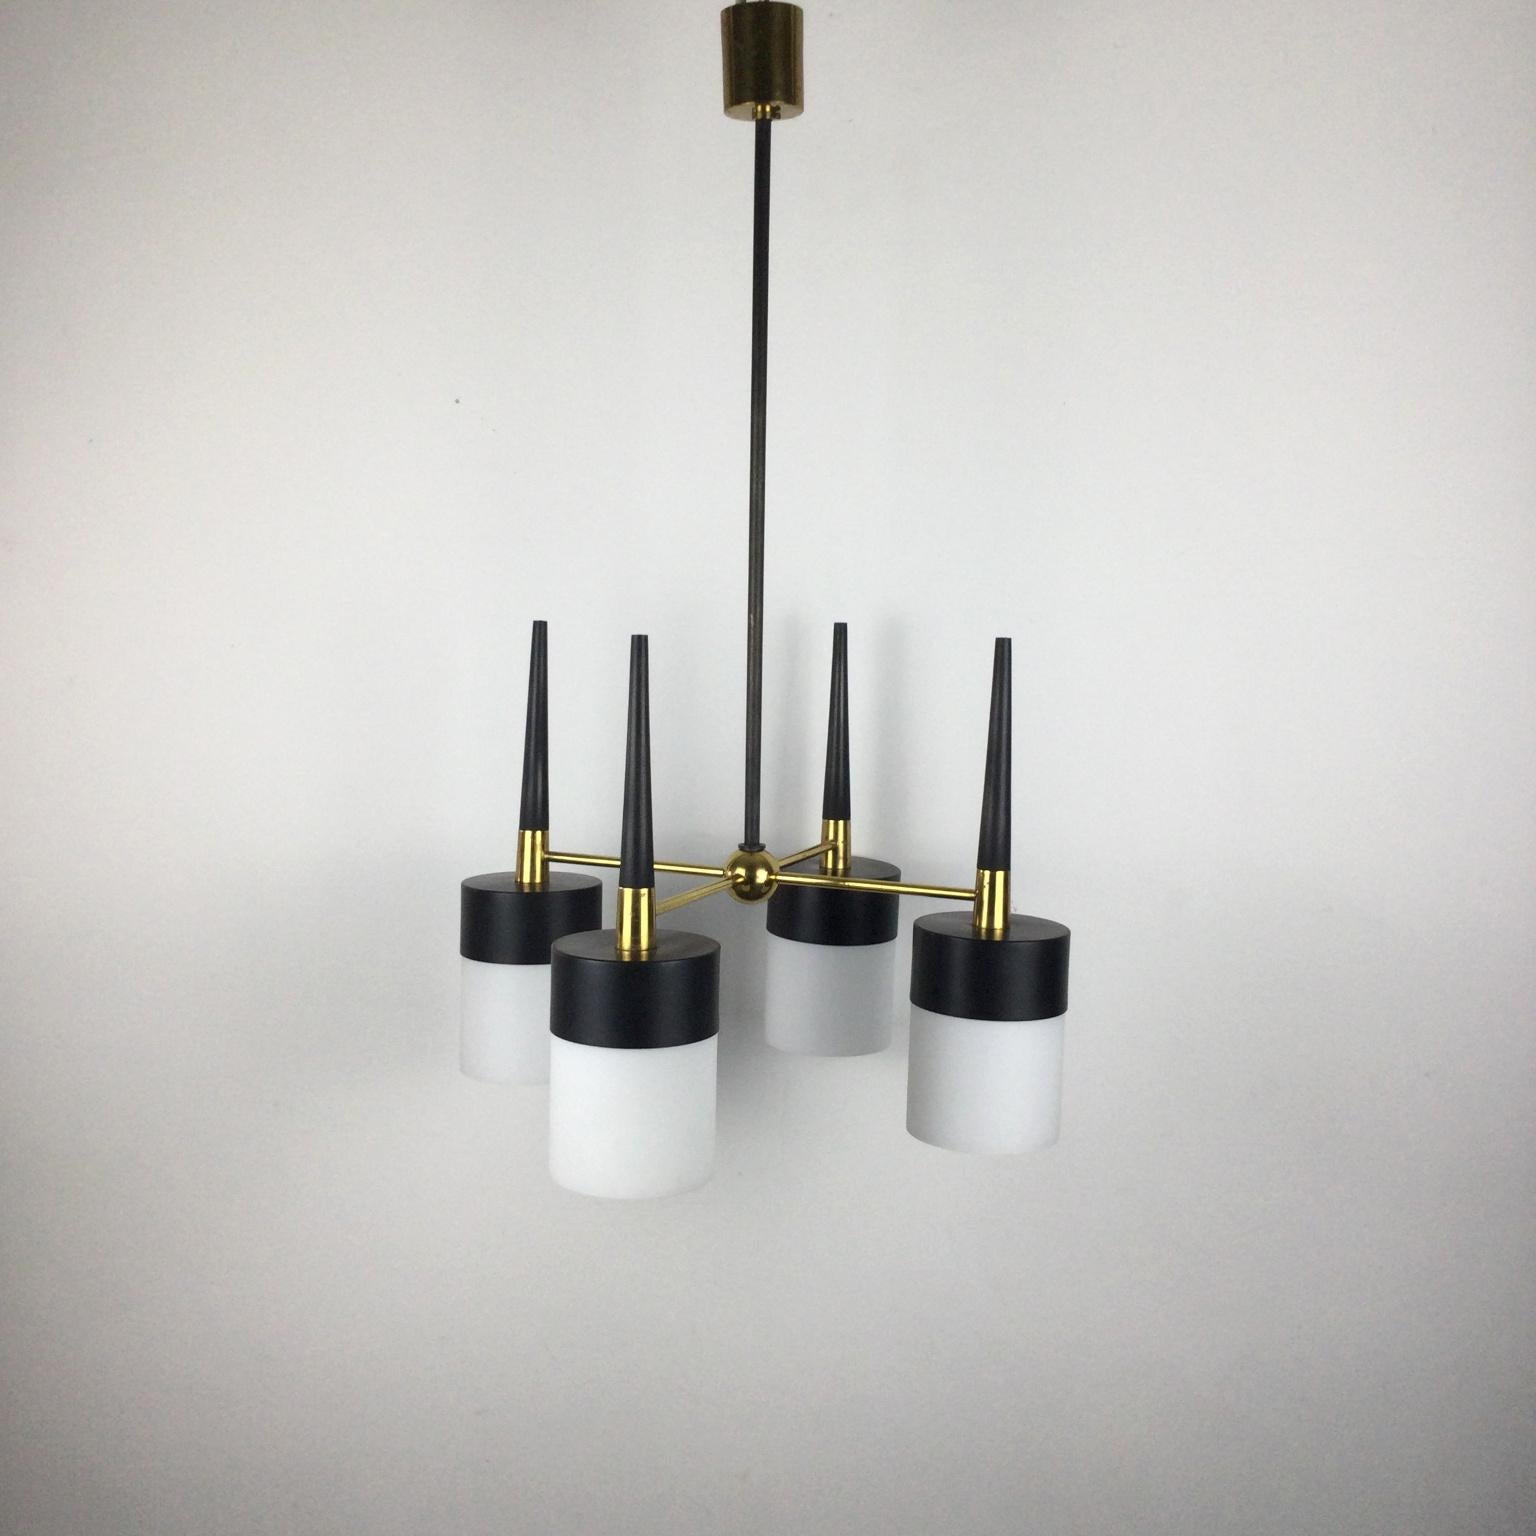 Metal 1950s Arlus Ceiling Light with Four Opalines Glass Shade and Brass Finish